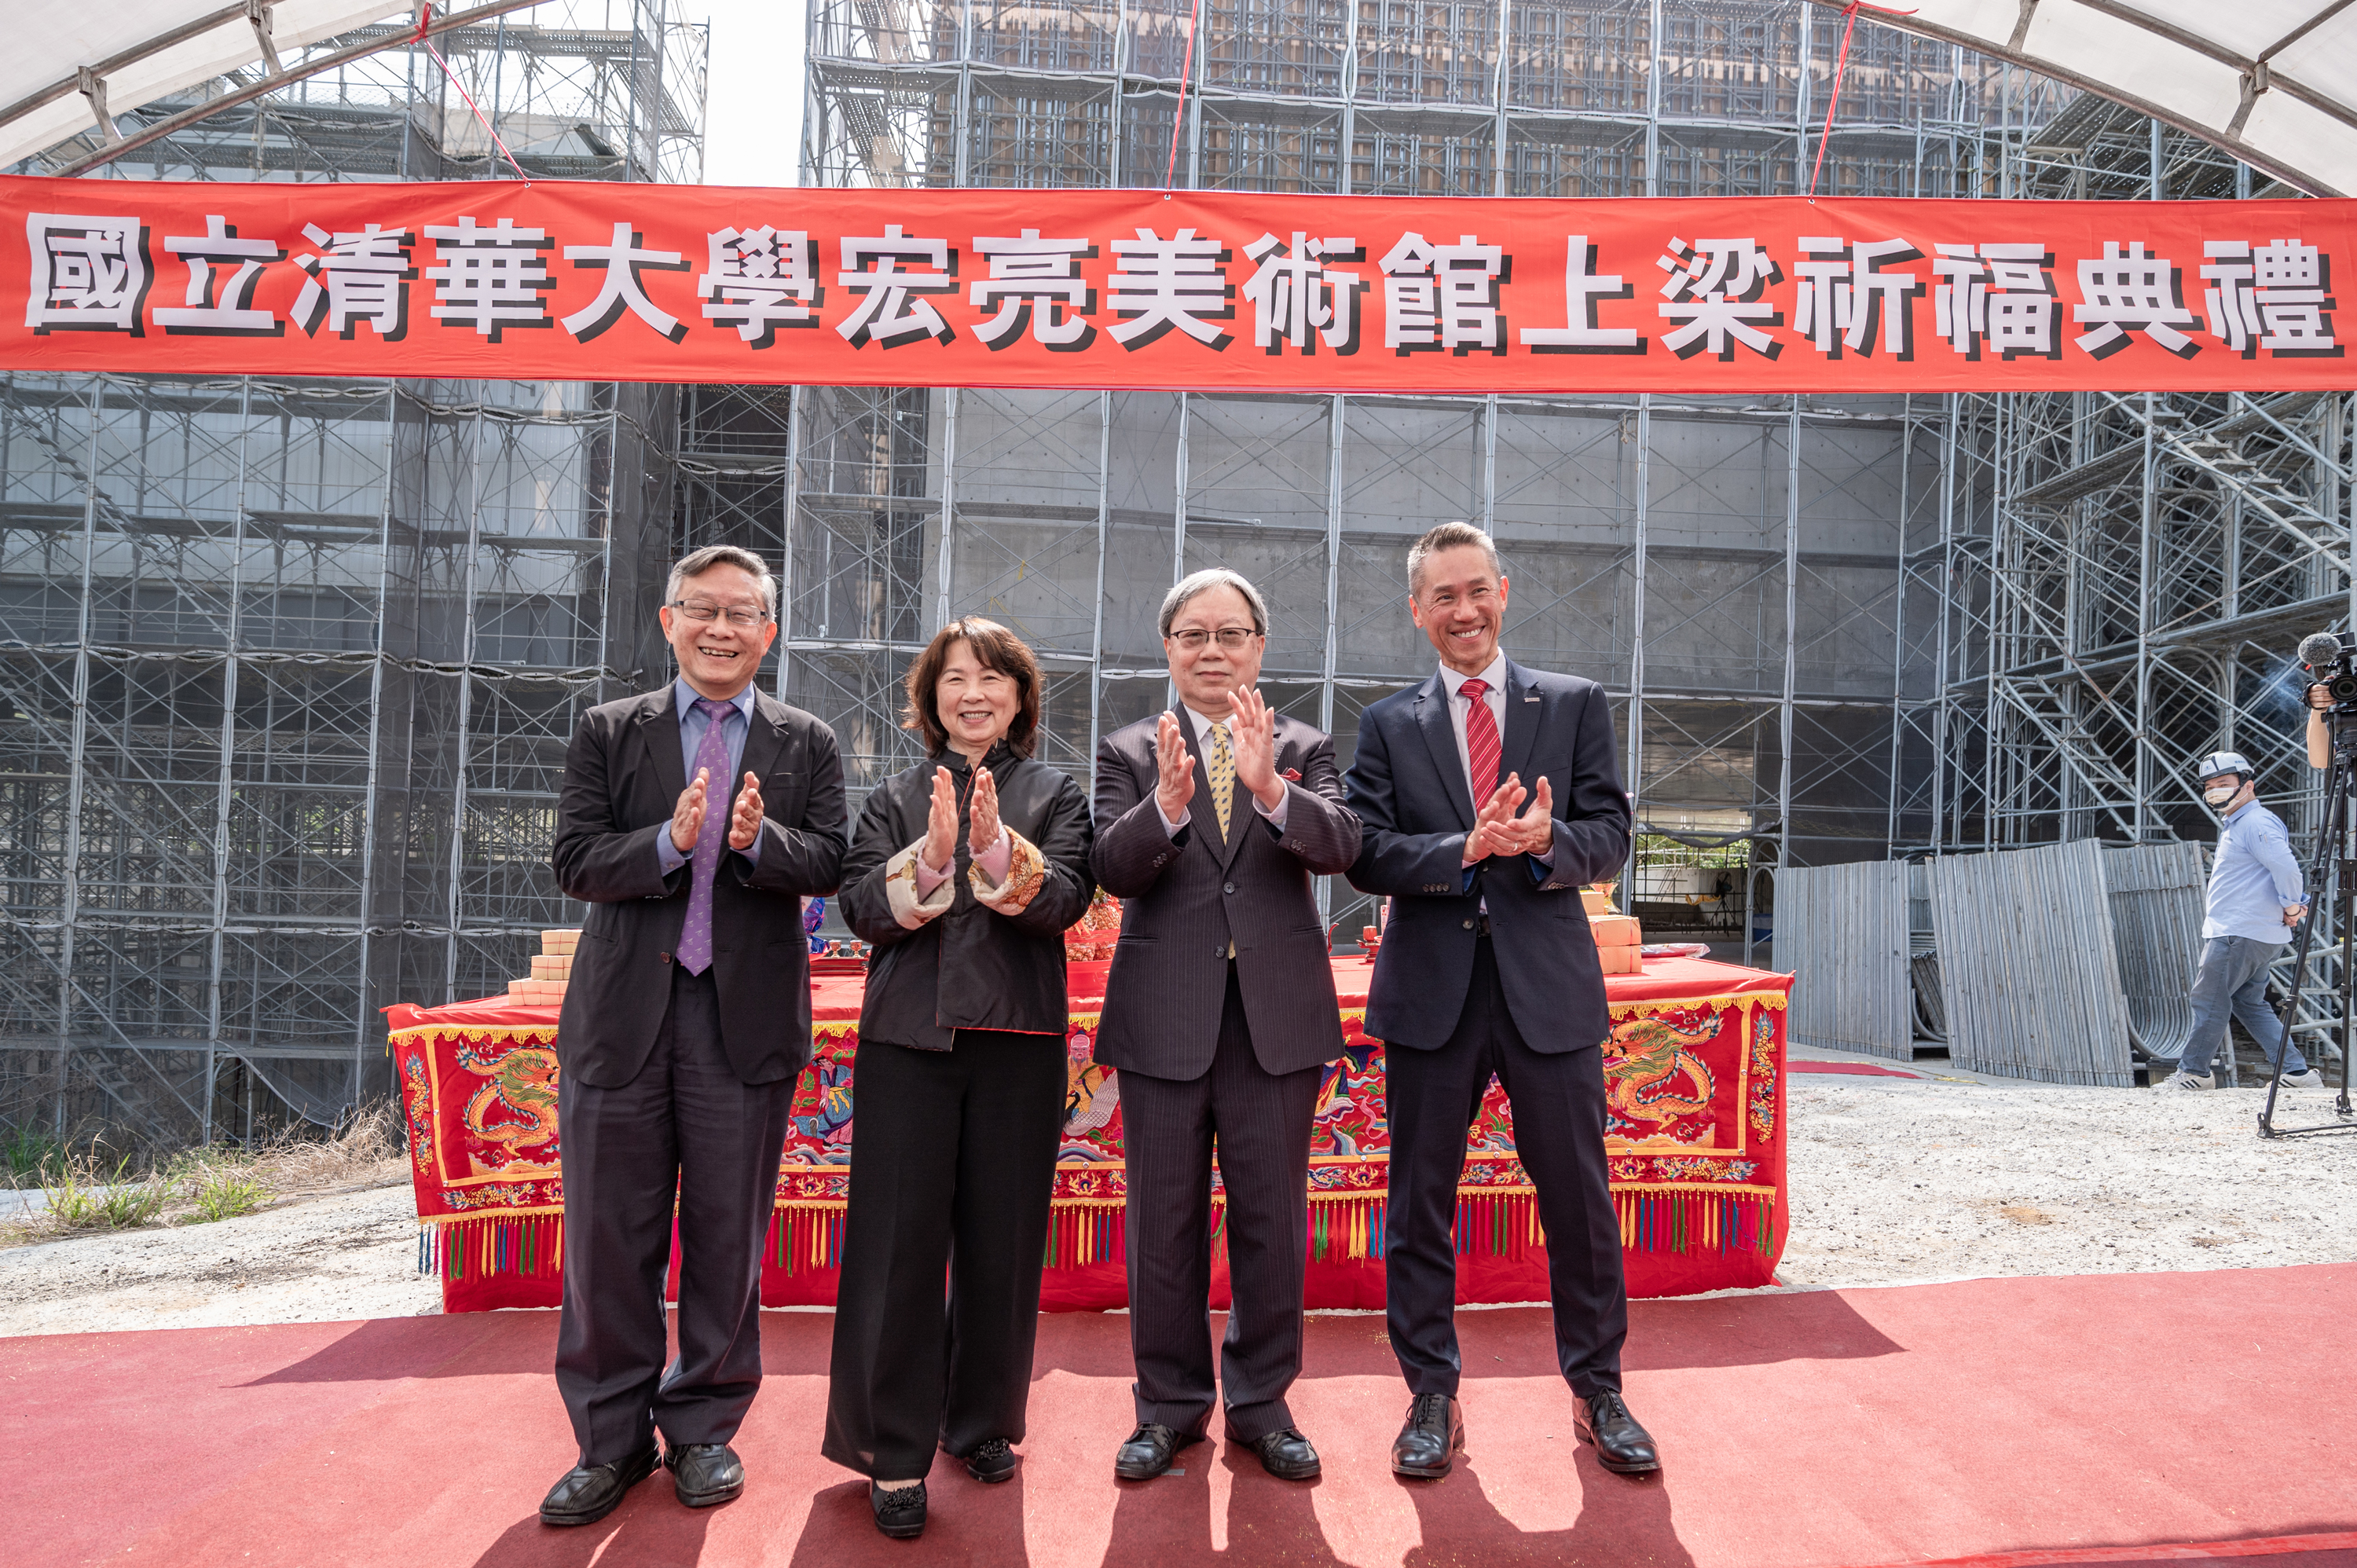 The beam-raising ceremony for the Hong Liang Art Museum was held by NTHU, with President W. John Kao (right), donor Chairman Hong-Liang Hsieh, Mrs. Fen-Ching Chiu (center), and former President Hocheng Hong (left), praying for the project